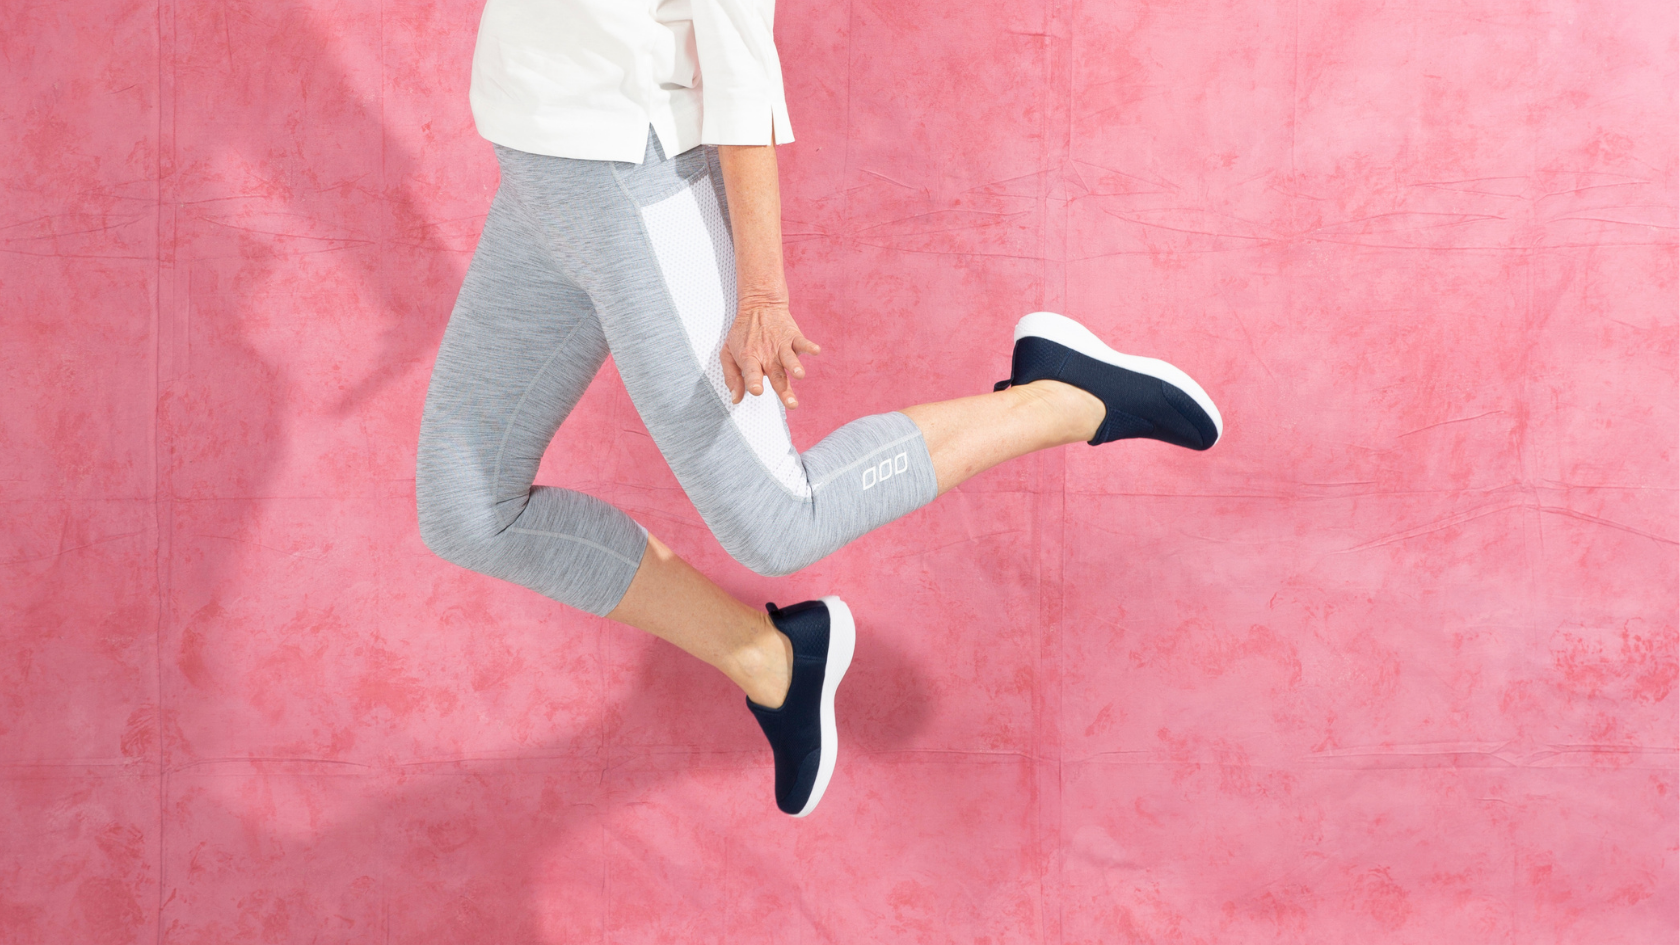 Snap shot of a woman jumping up in front of a pink background wearing slip on sneakers.